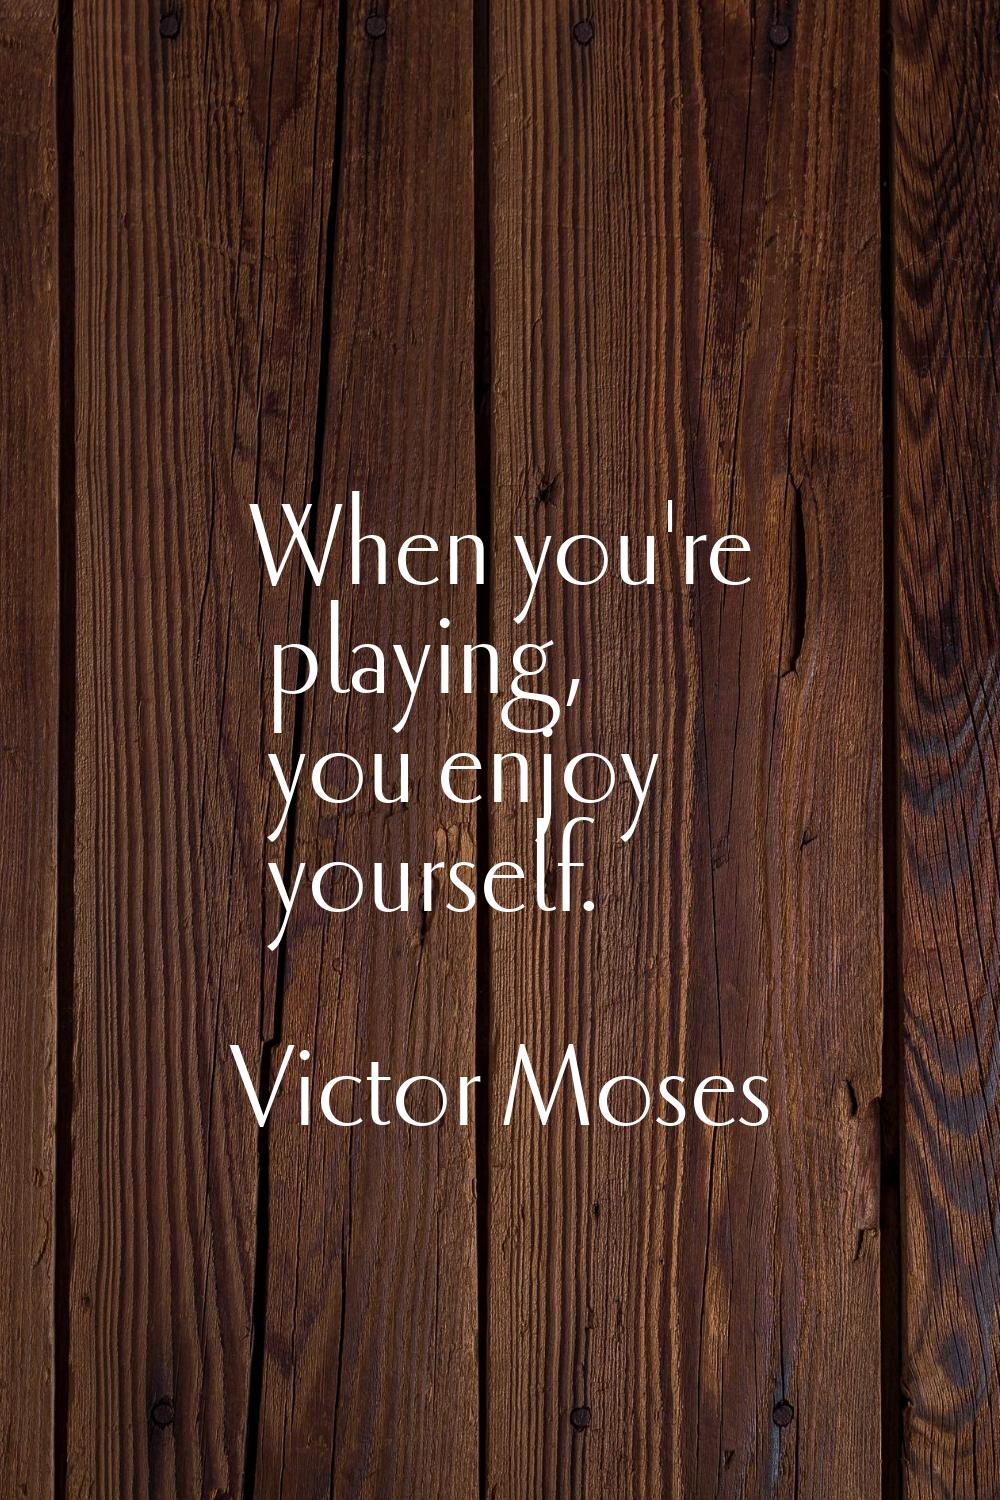 When you're playing, you enjoy yourself.